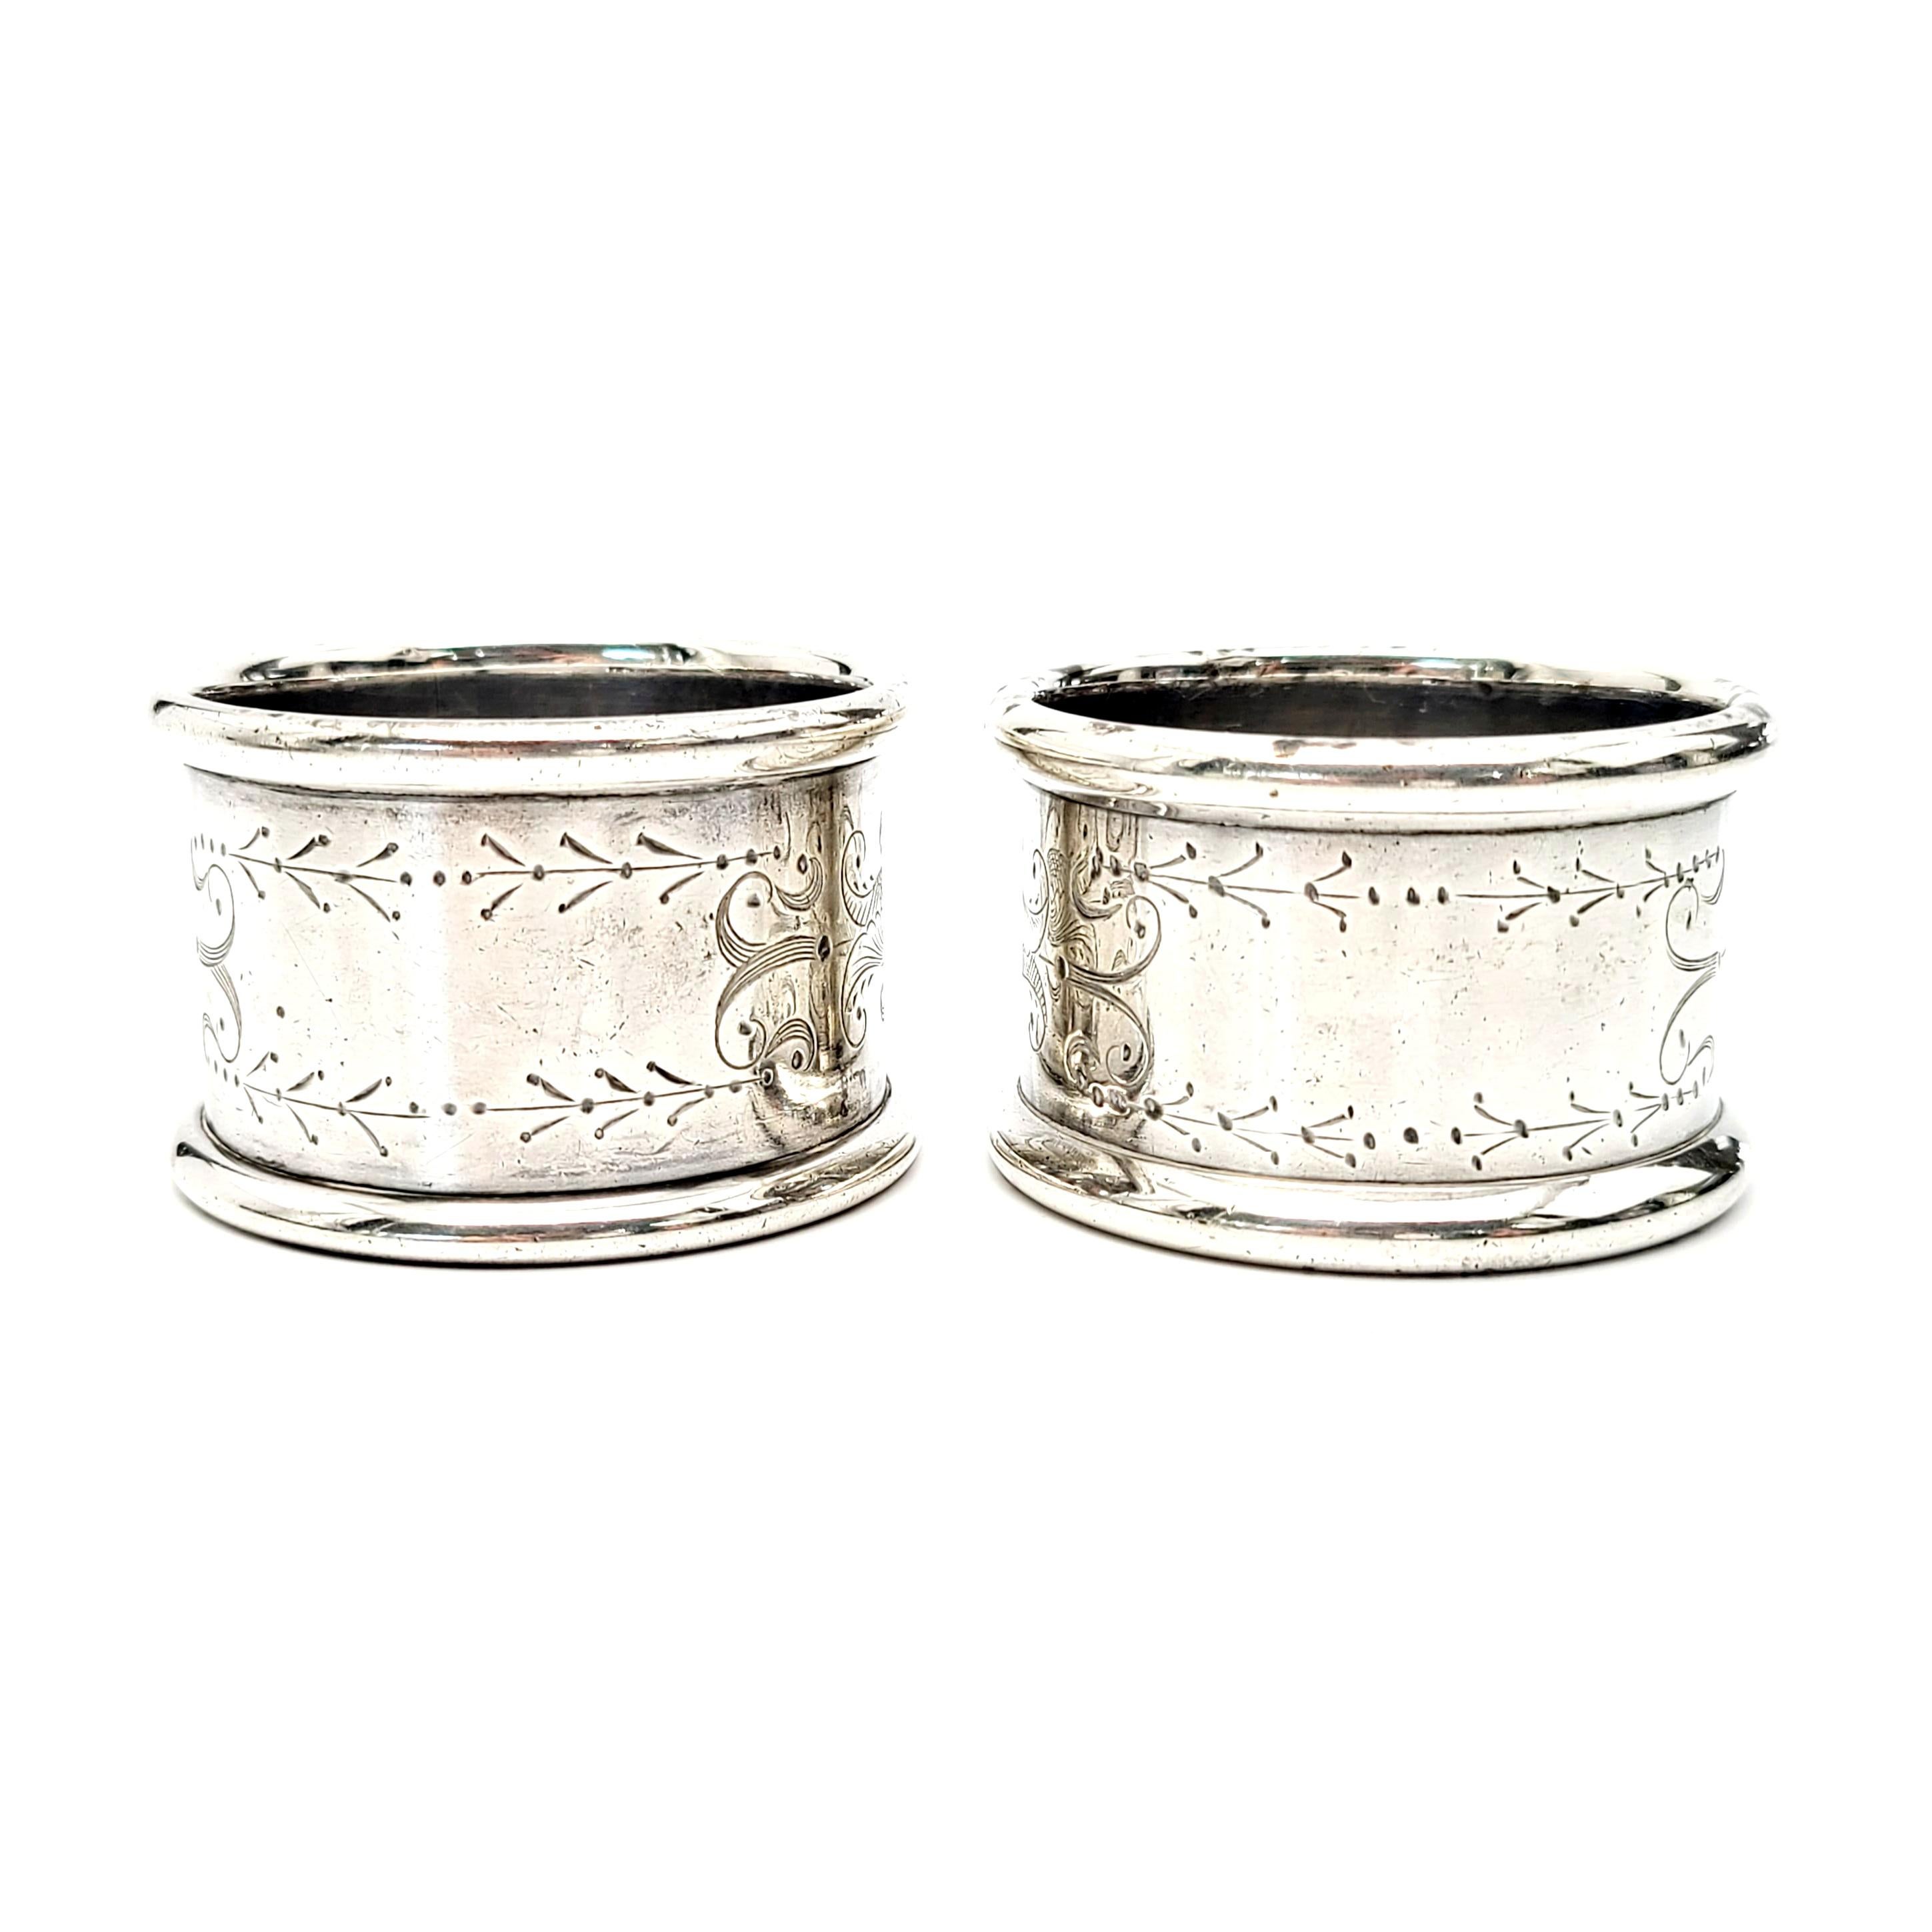 Set of 2 Towle Sterling Silver Napkin Rings 8770 In Good Condition For Sale In Washington Depot, CT